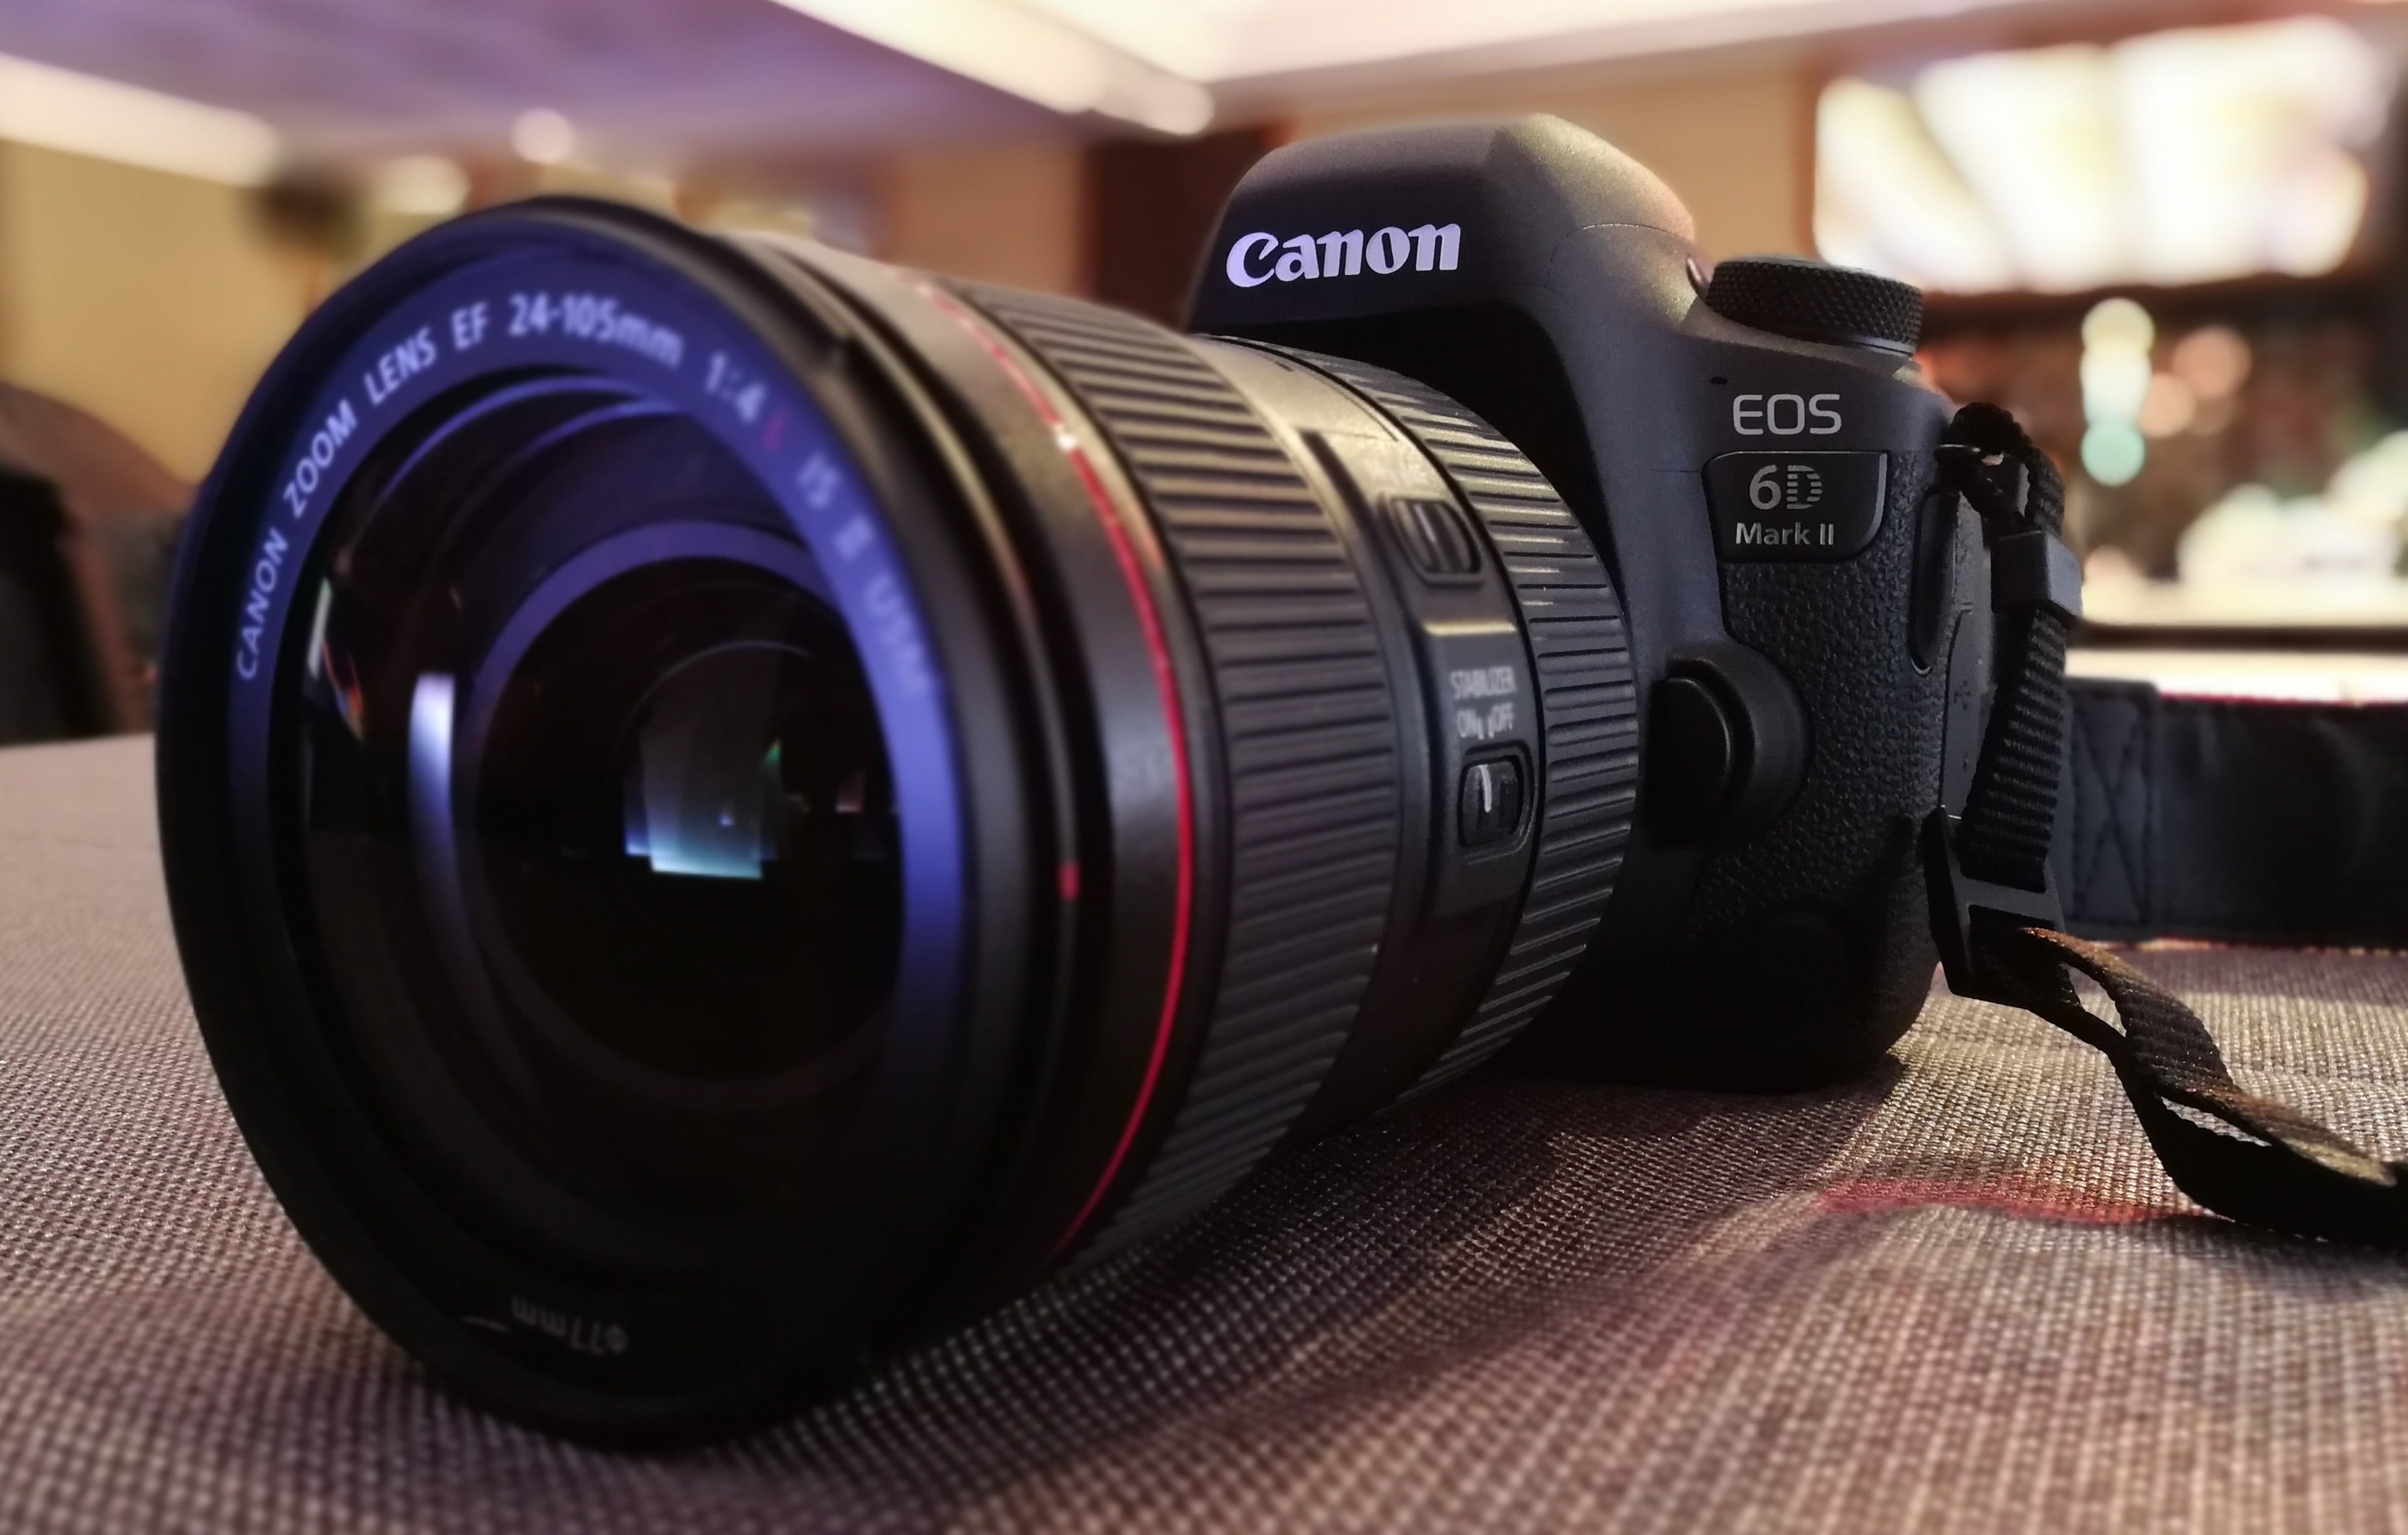 canon-eos-6d-mark-ii-dslr-launched-in-india-with-starting-at-rs-1